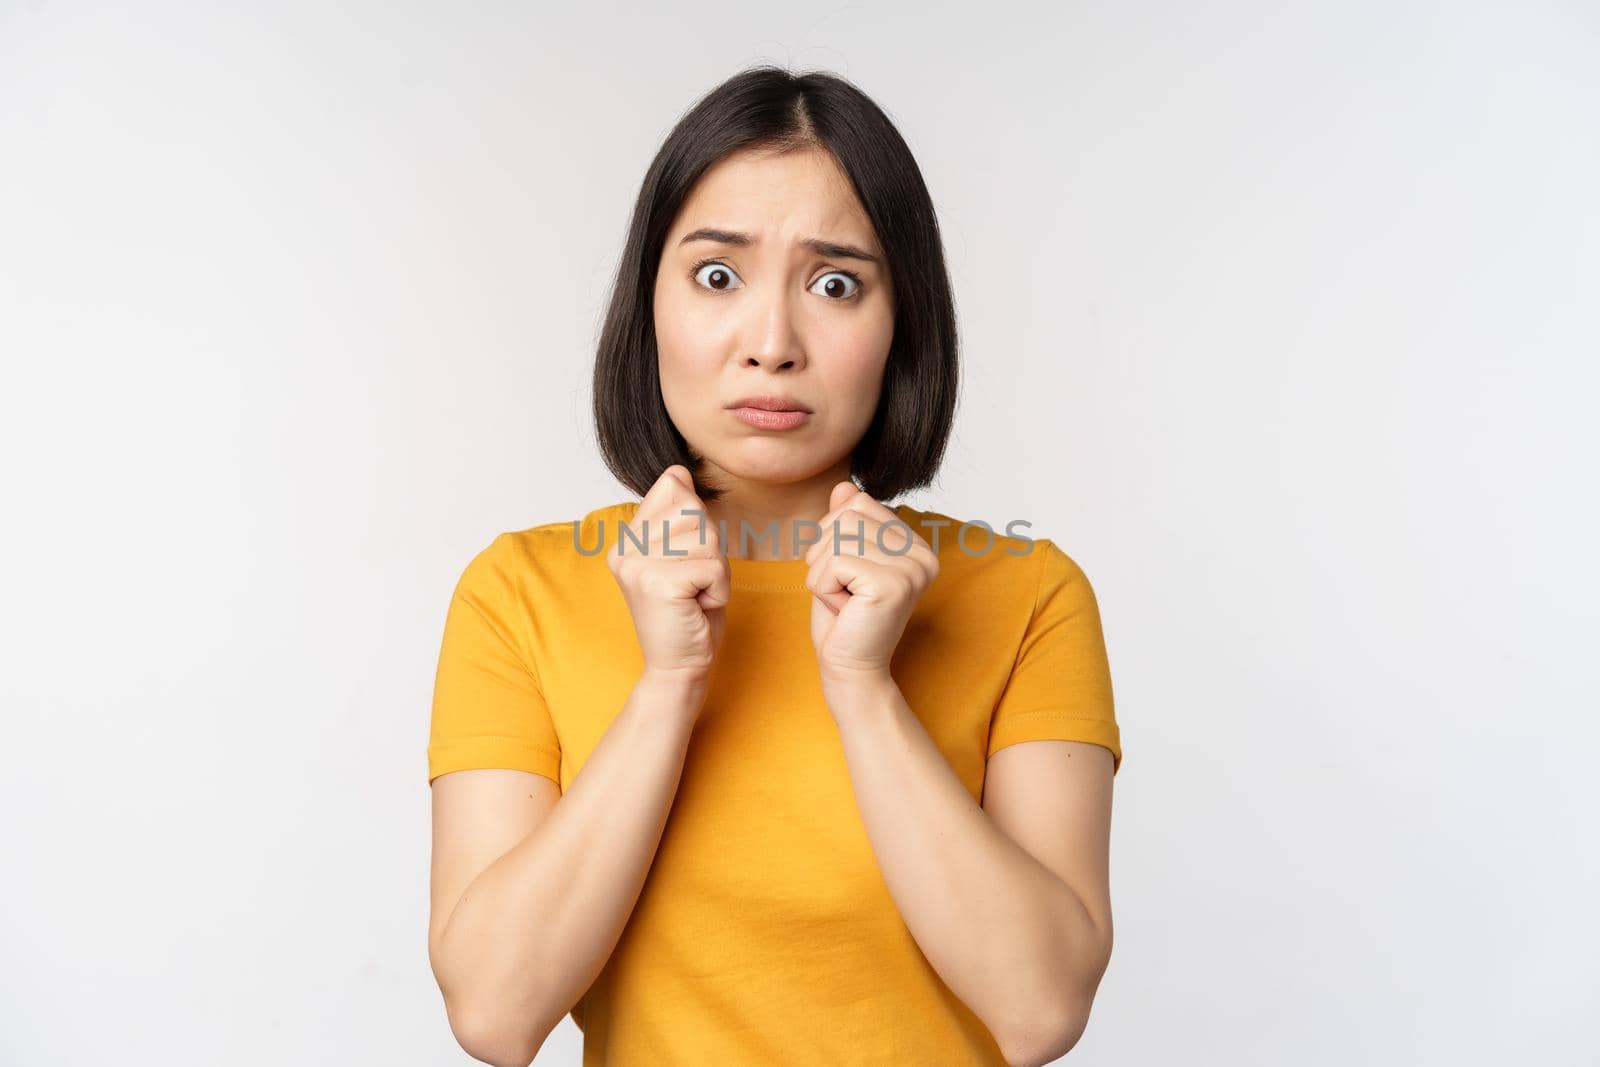 Portrait of scared asian woman shaking from fear, looking terrified and concerned, standing anxious against white background.